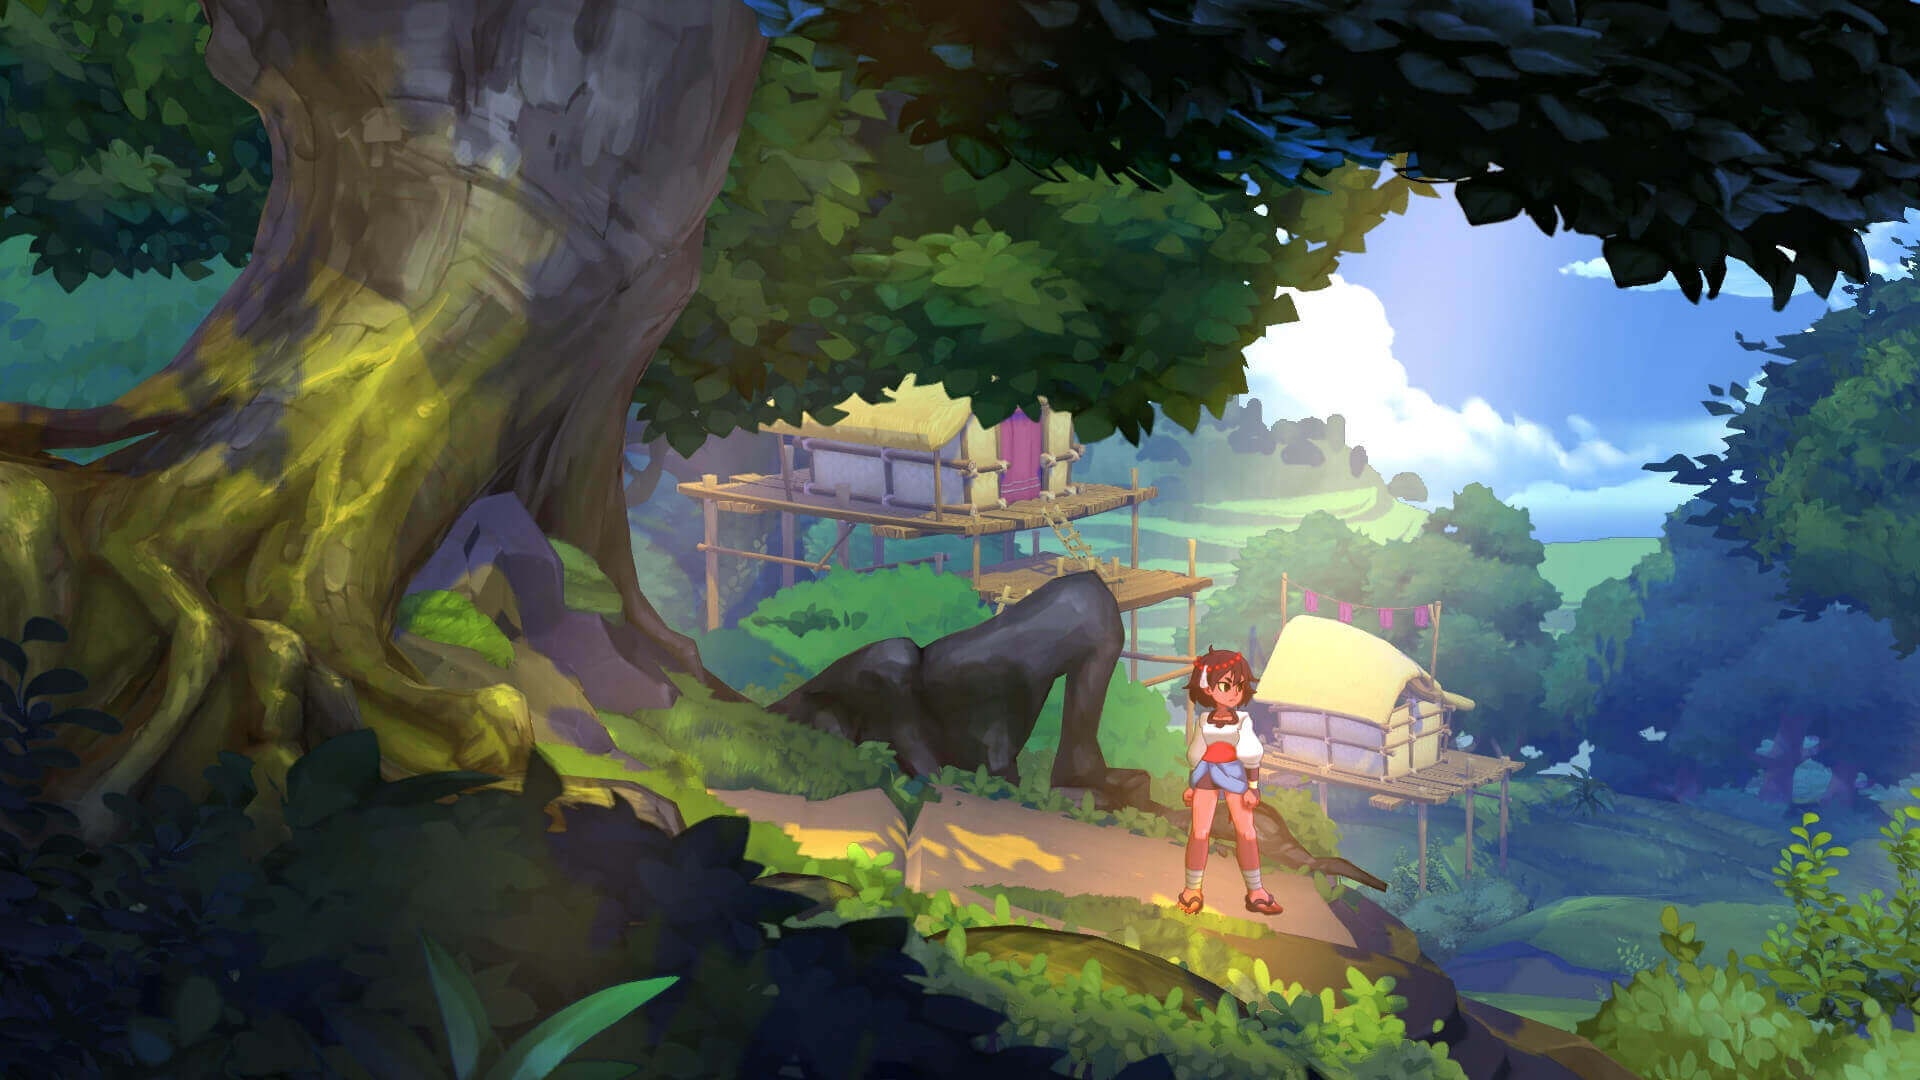 Indivisible Video Game Art Artwork Video Game Characters Ajna Lab Zero Games Screen Shot Village Tre 1920x1080